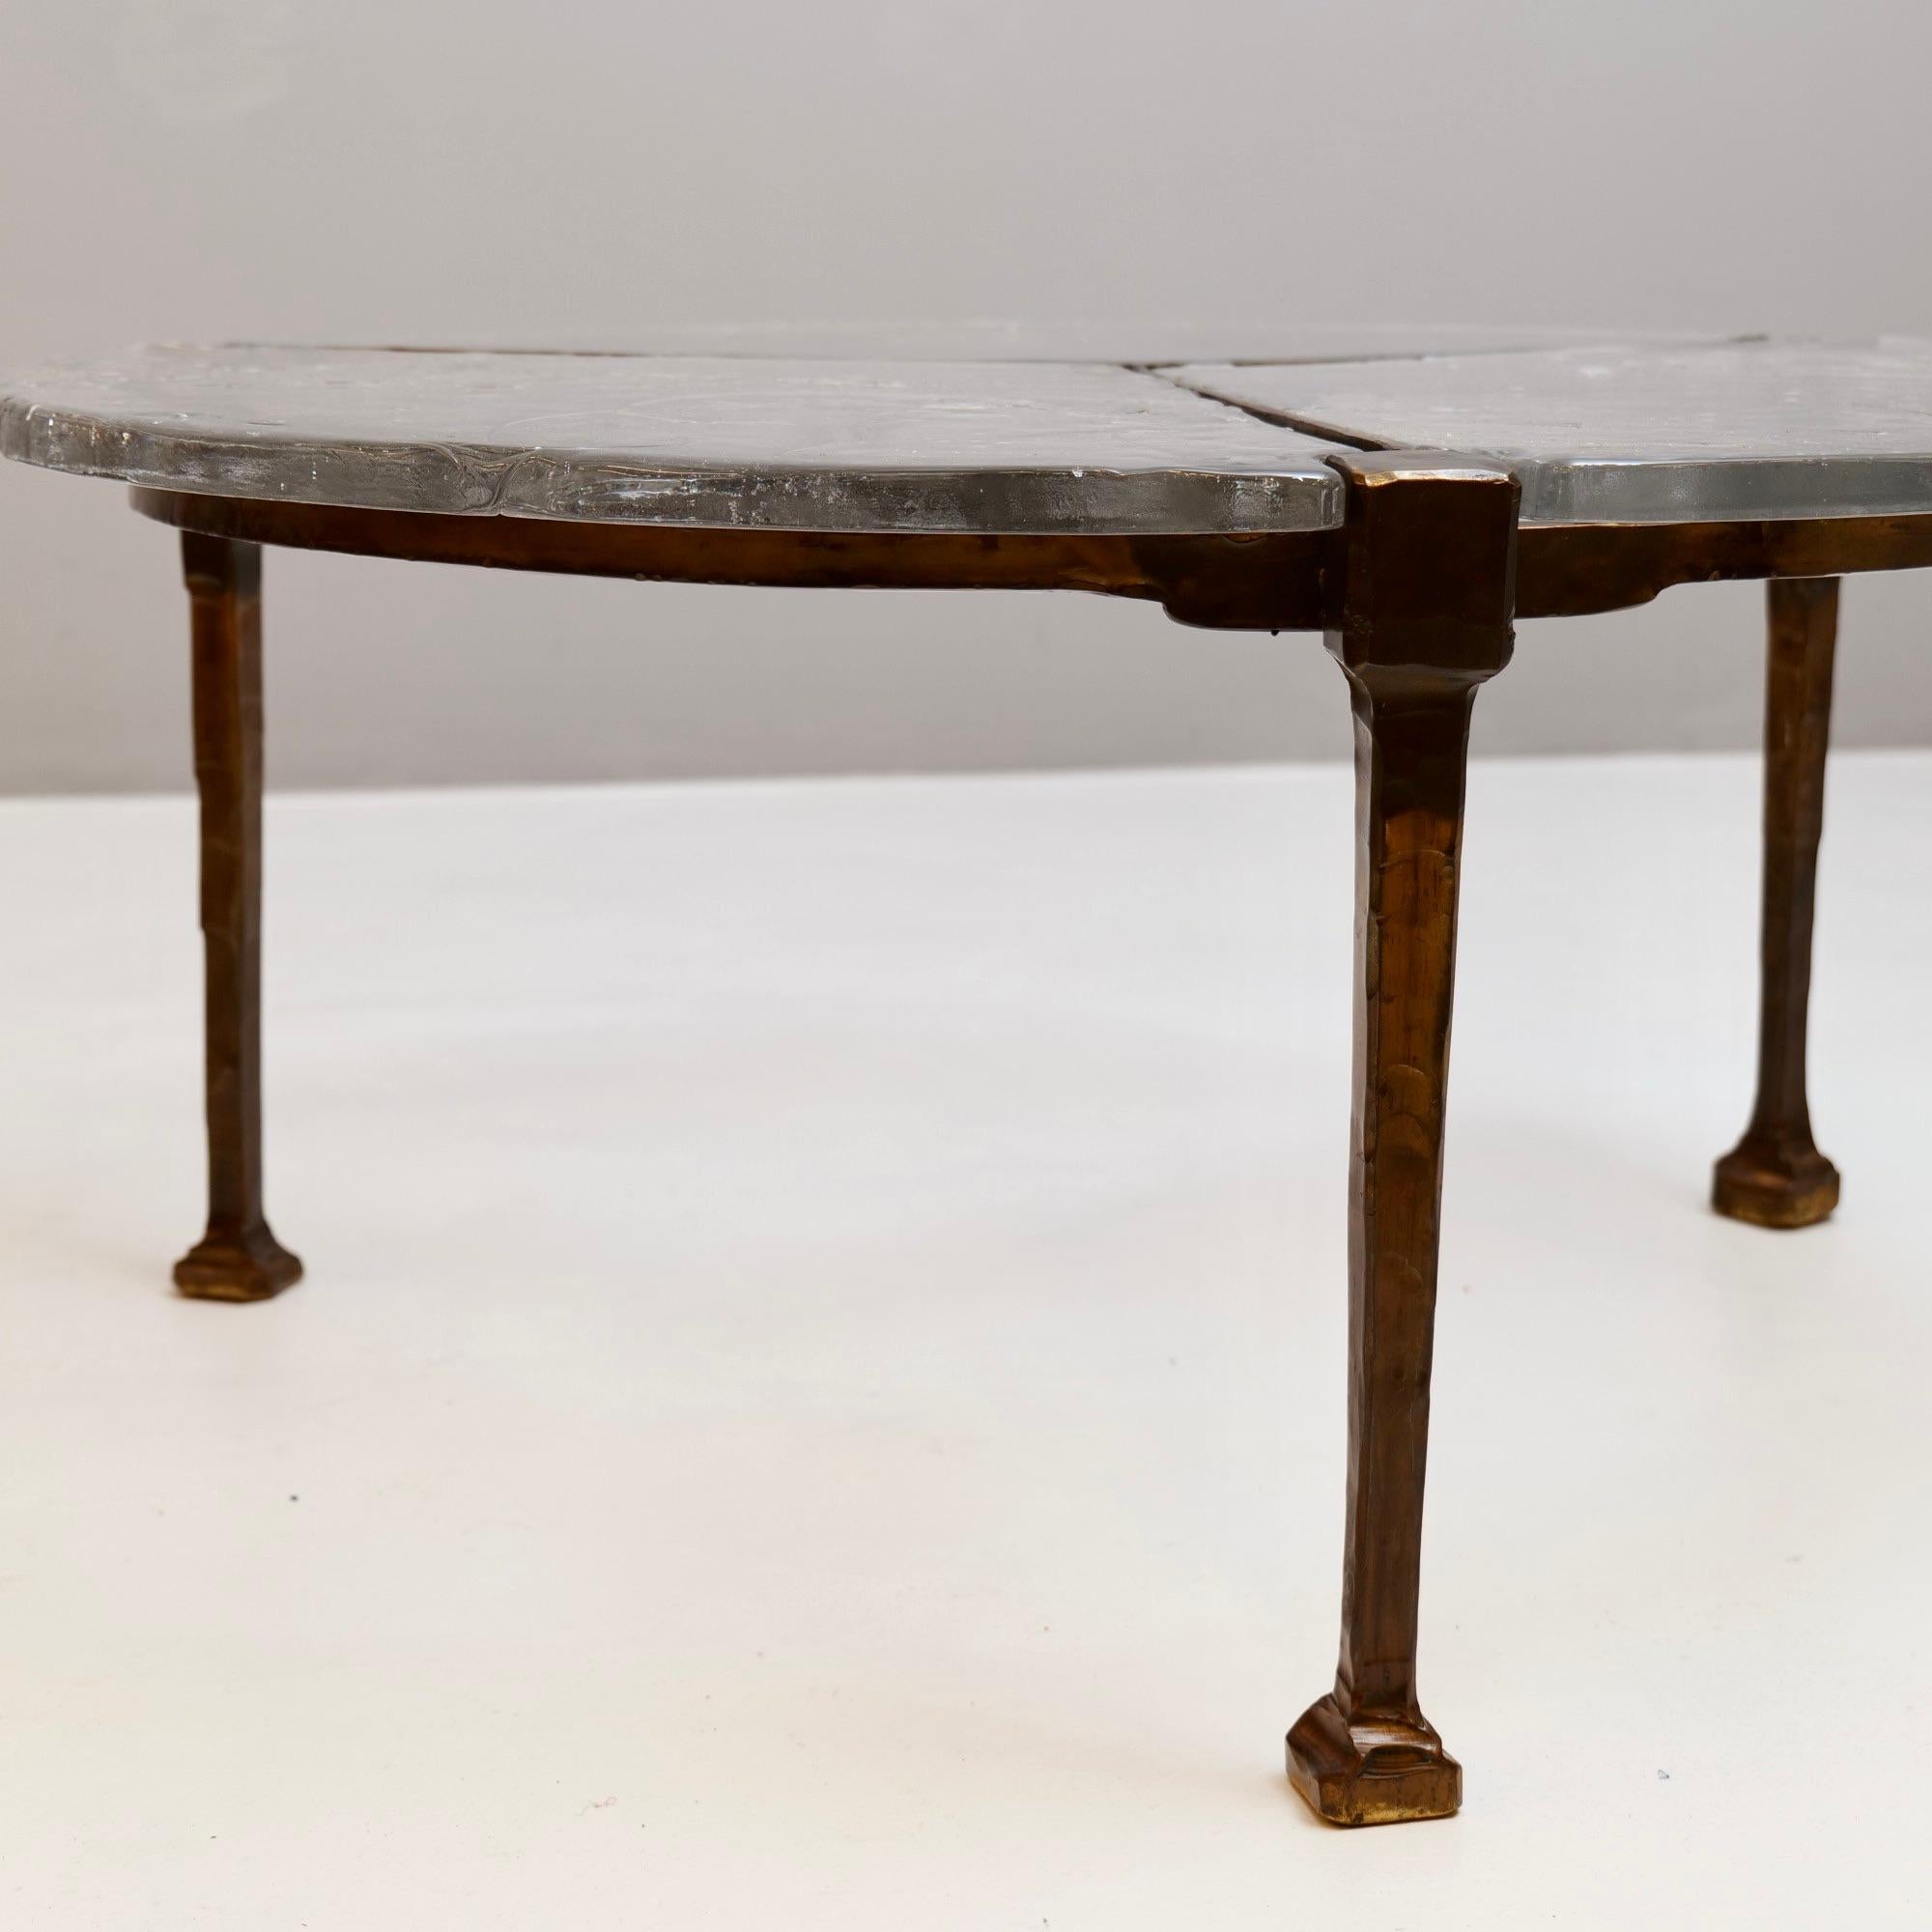 Bronze forged bronze & glass table by Lothar Klute - 1980s